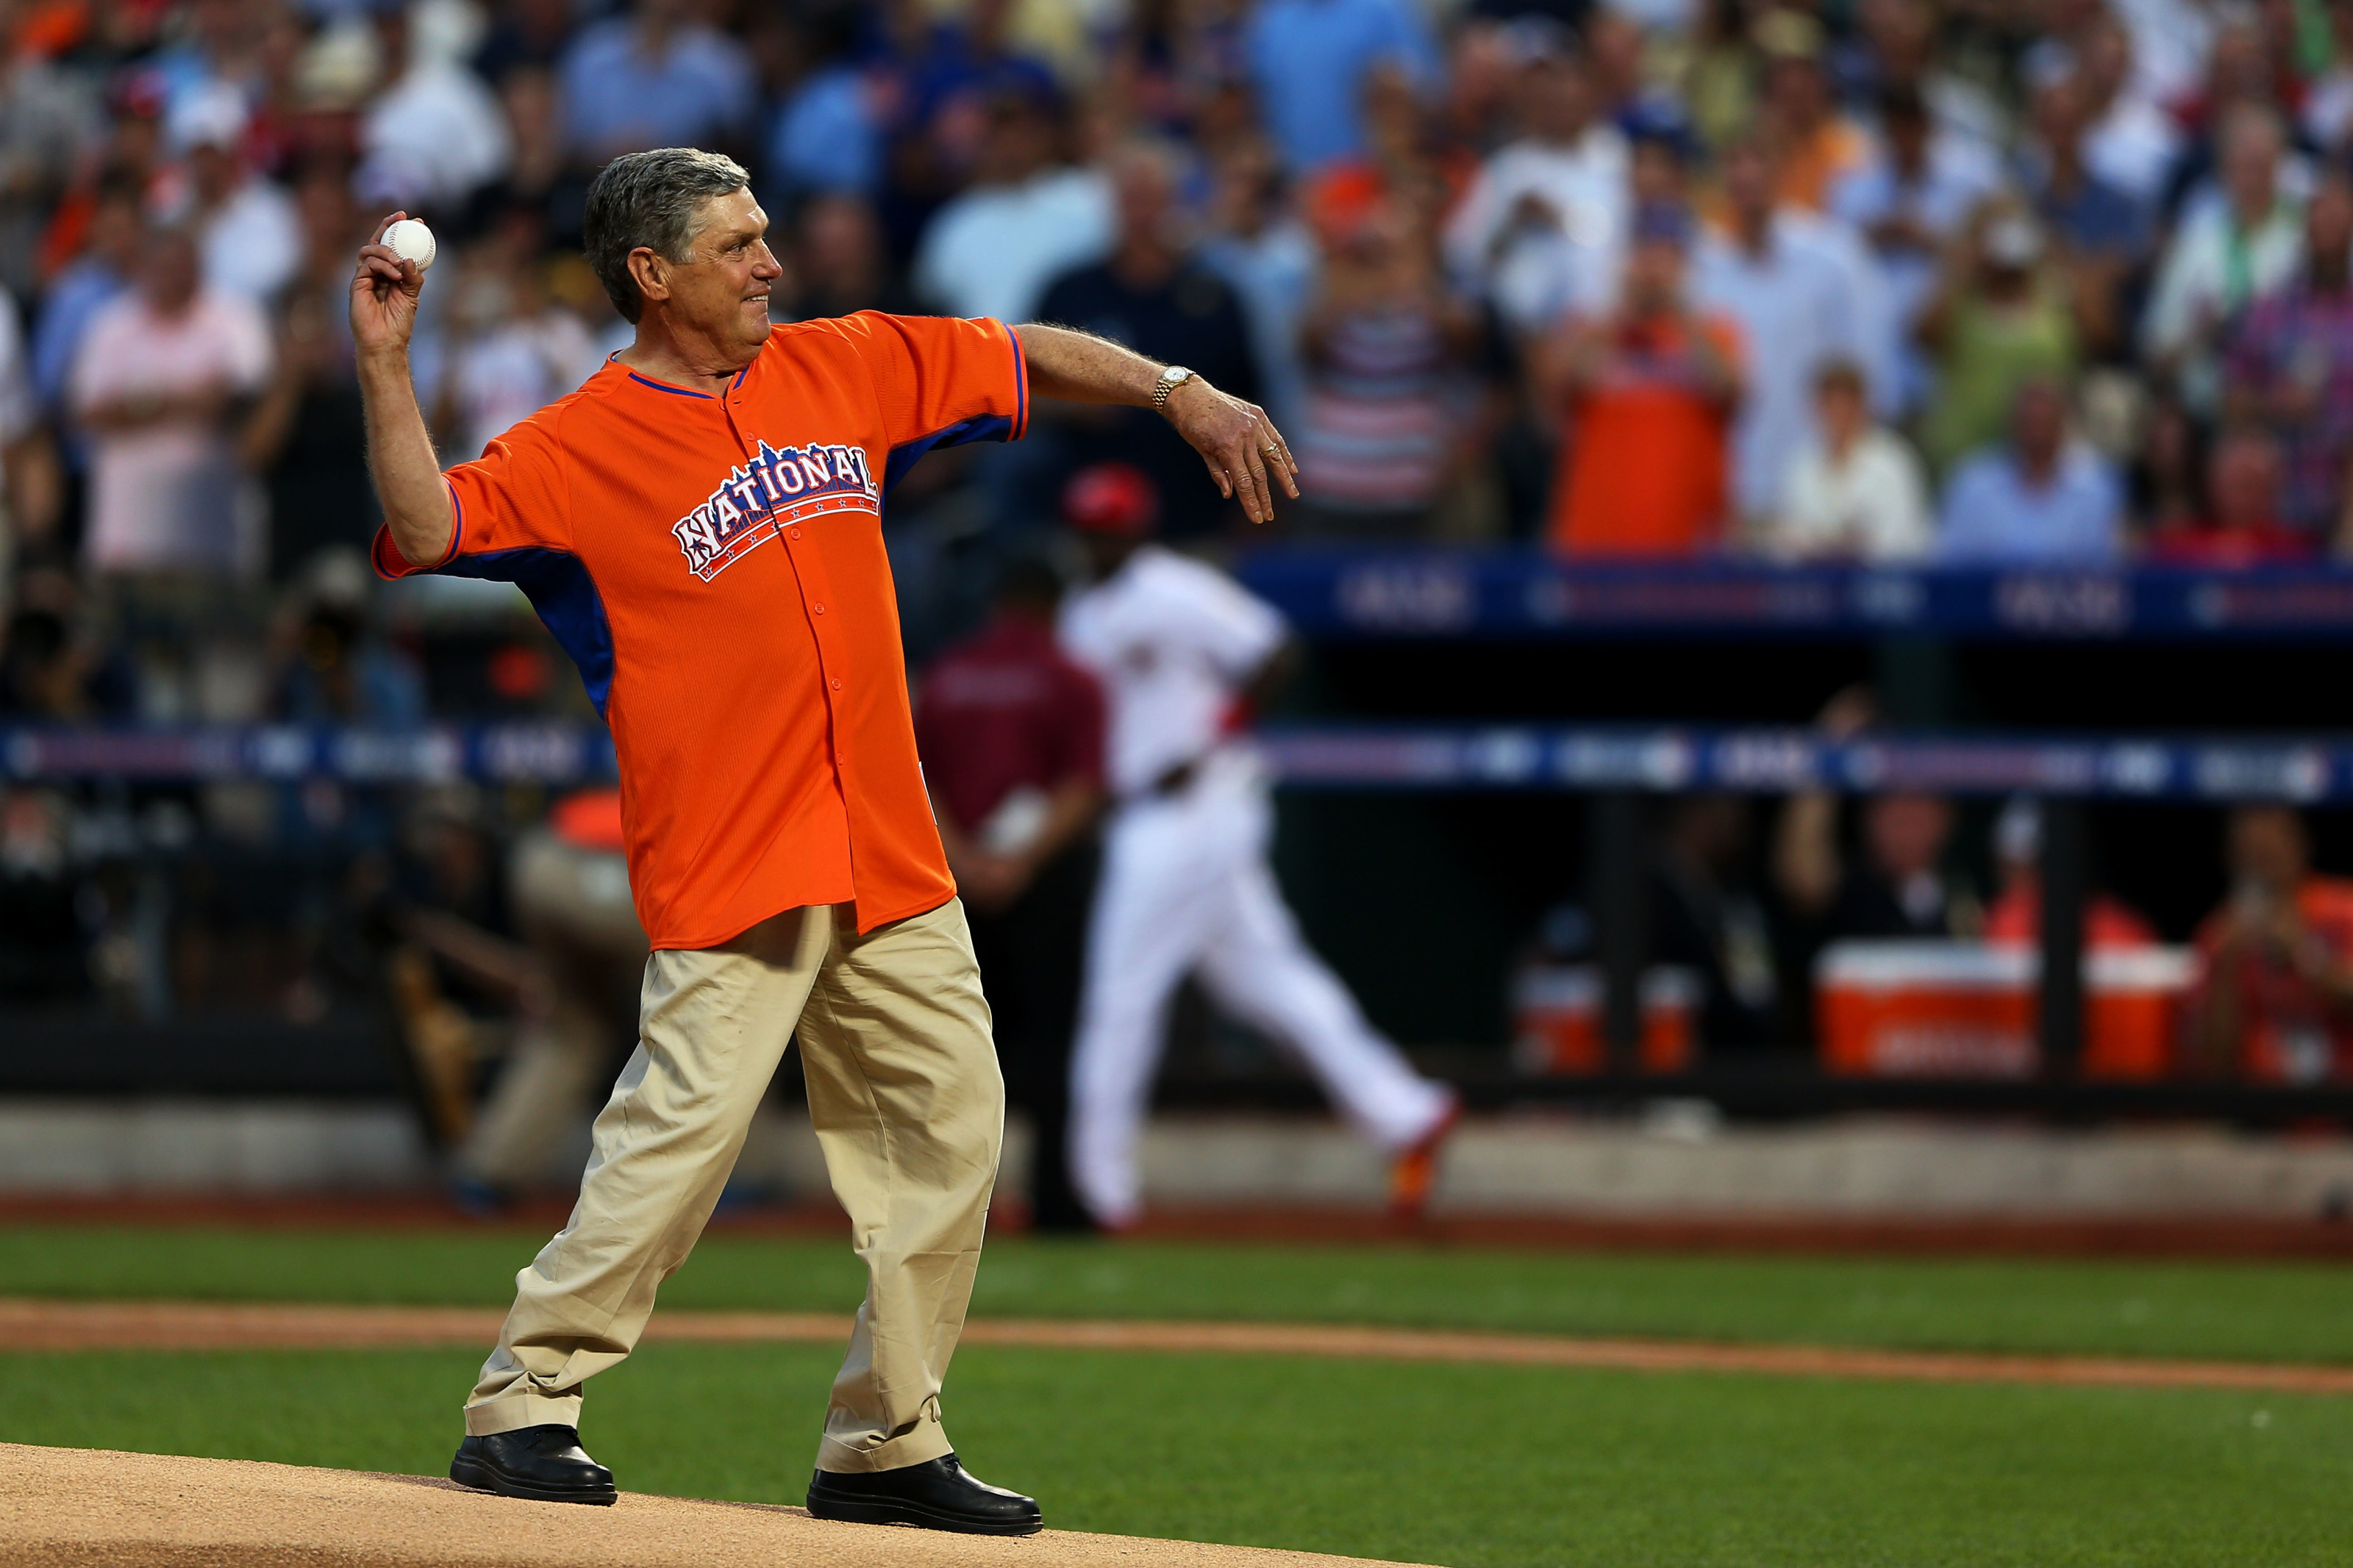 Tom Seaver may be gone, but his legacy will live forever